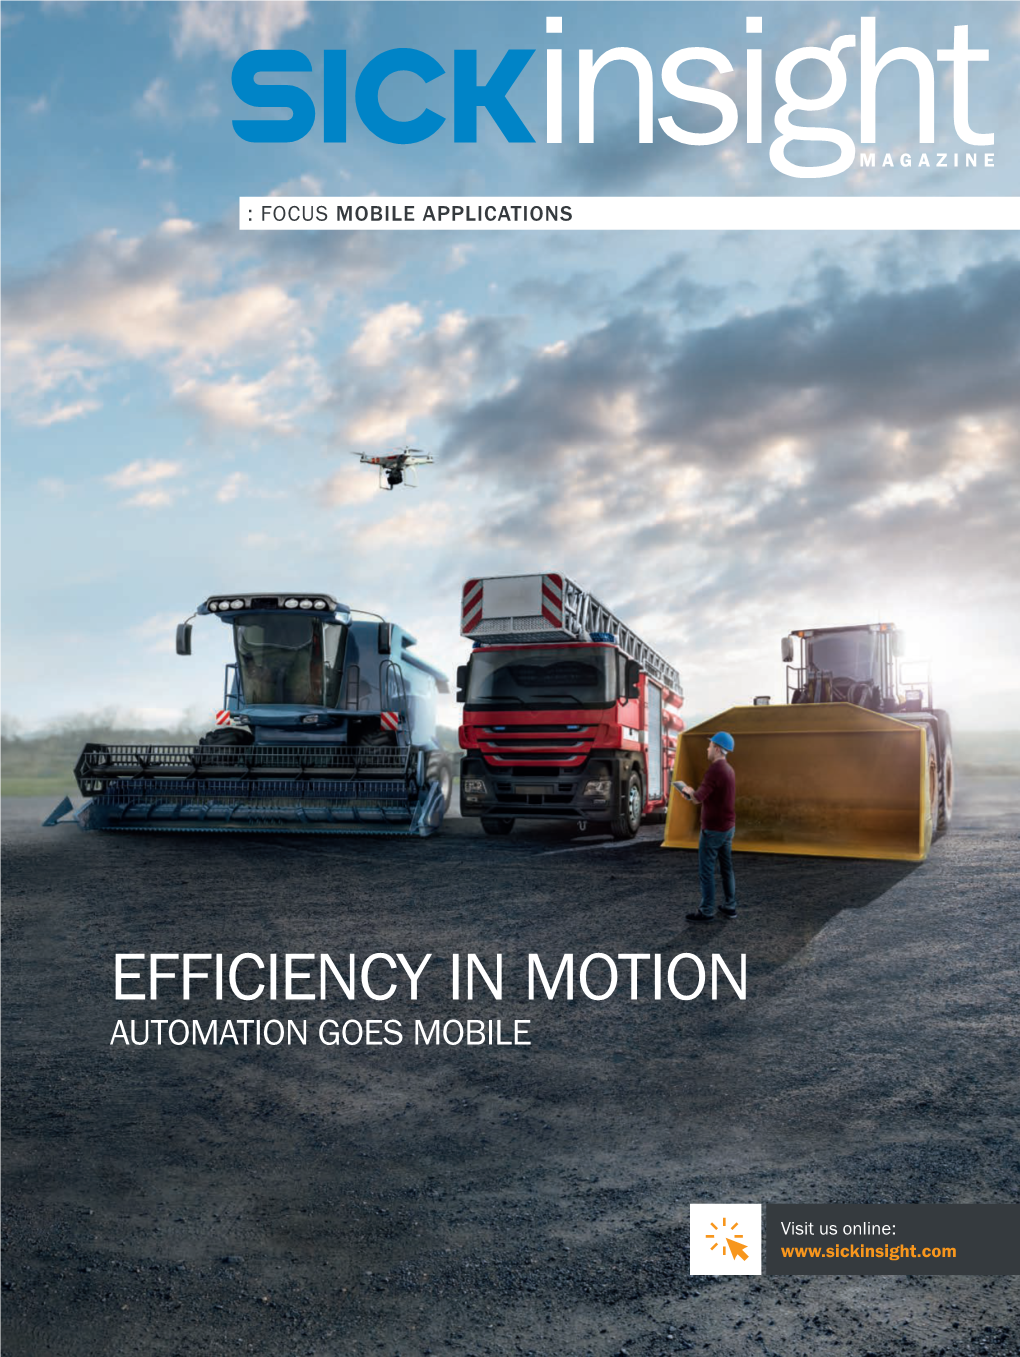 Efficiency in Motion – Automation Goes Mobile